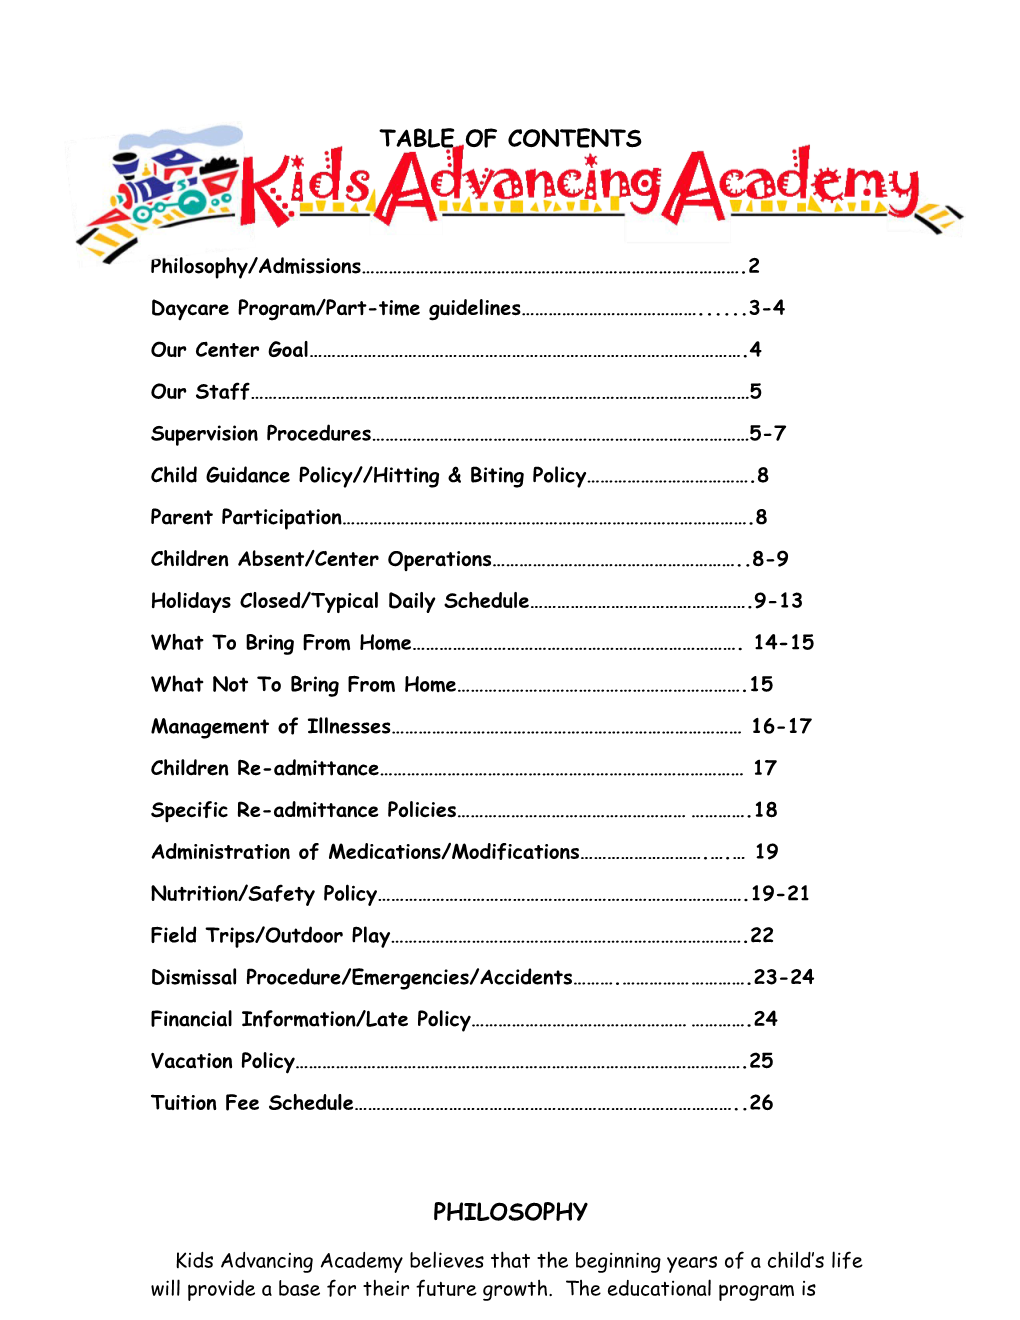 Daycare Program/Part-Time Guidelines 3-4